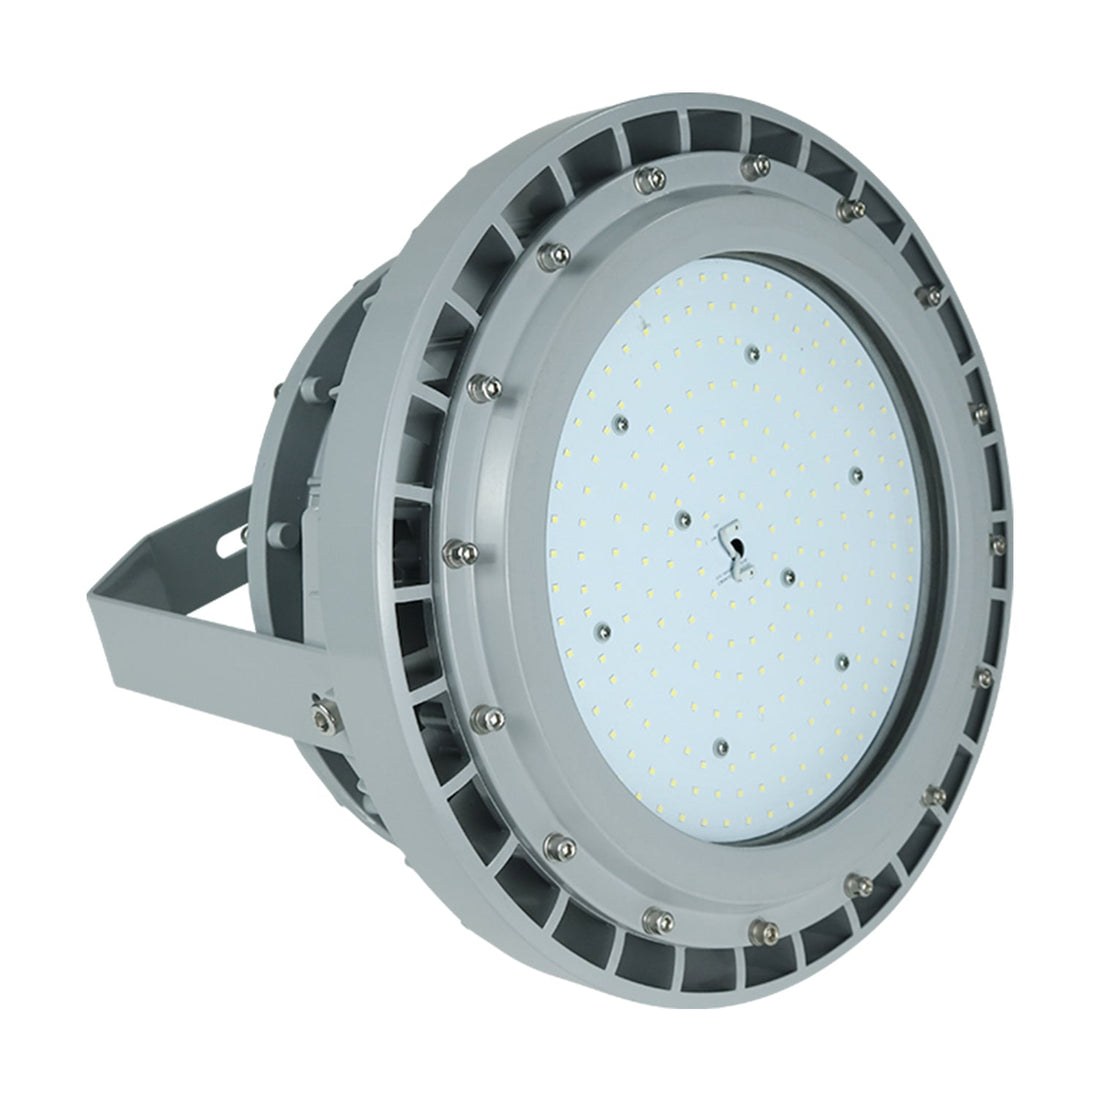 Powerful and Safe: 150W LED Explosion-Proof High Bay Light for Hazardous Locations - Non-Dimmable, 5000K, 20250LM, IP66 Rated